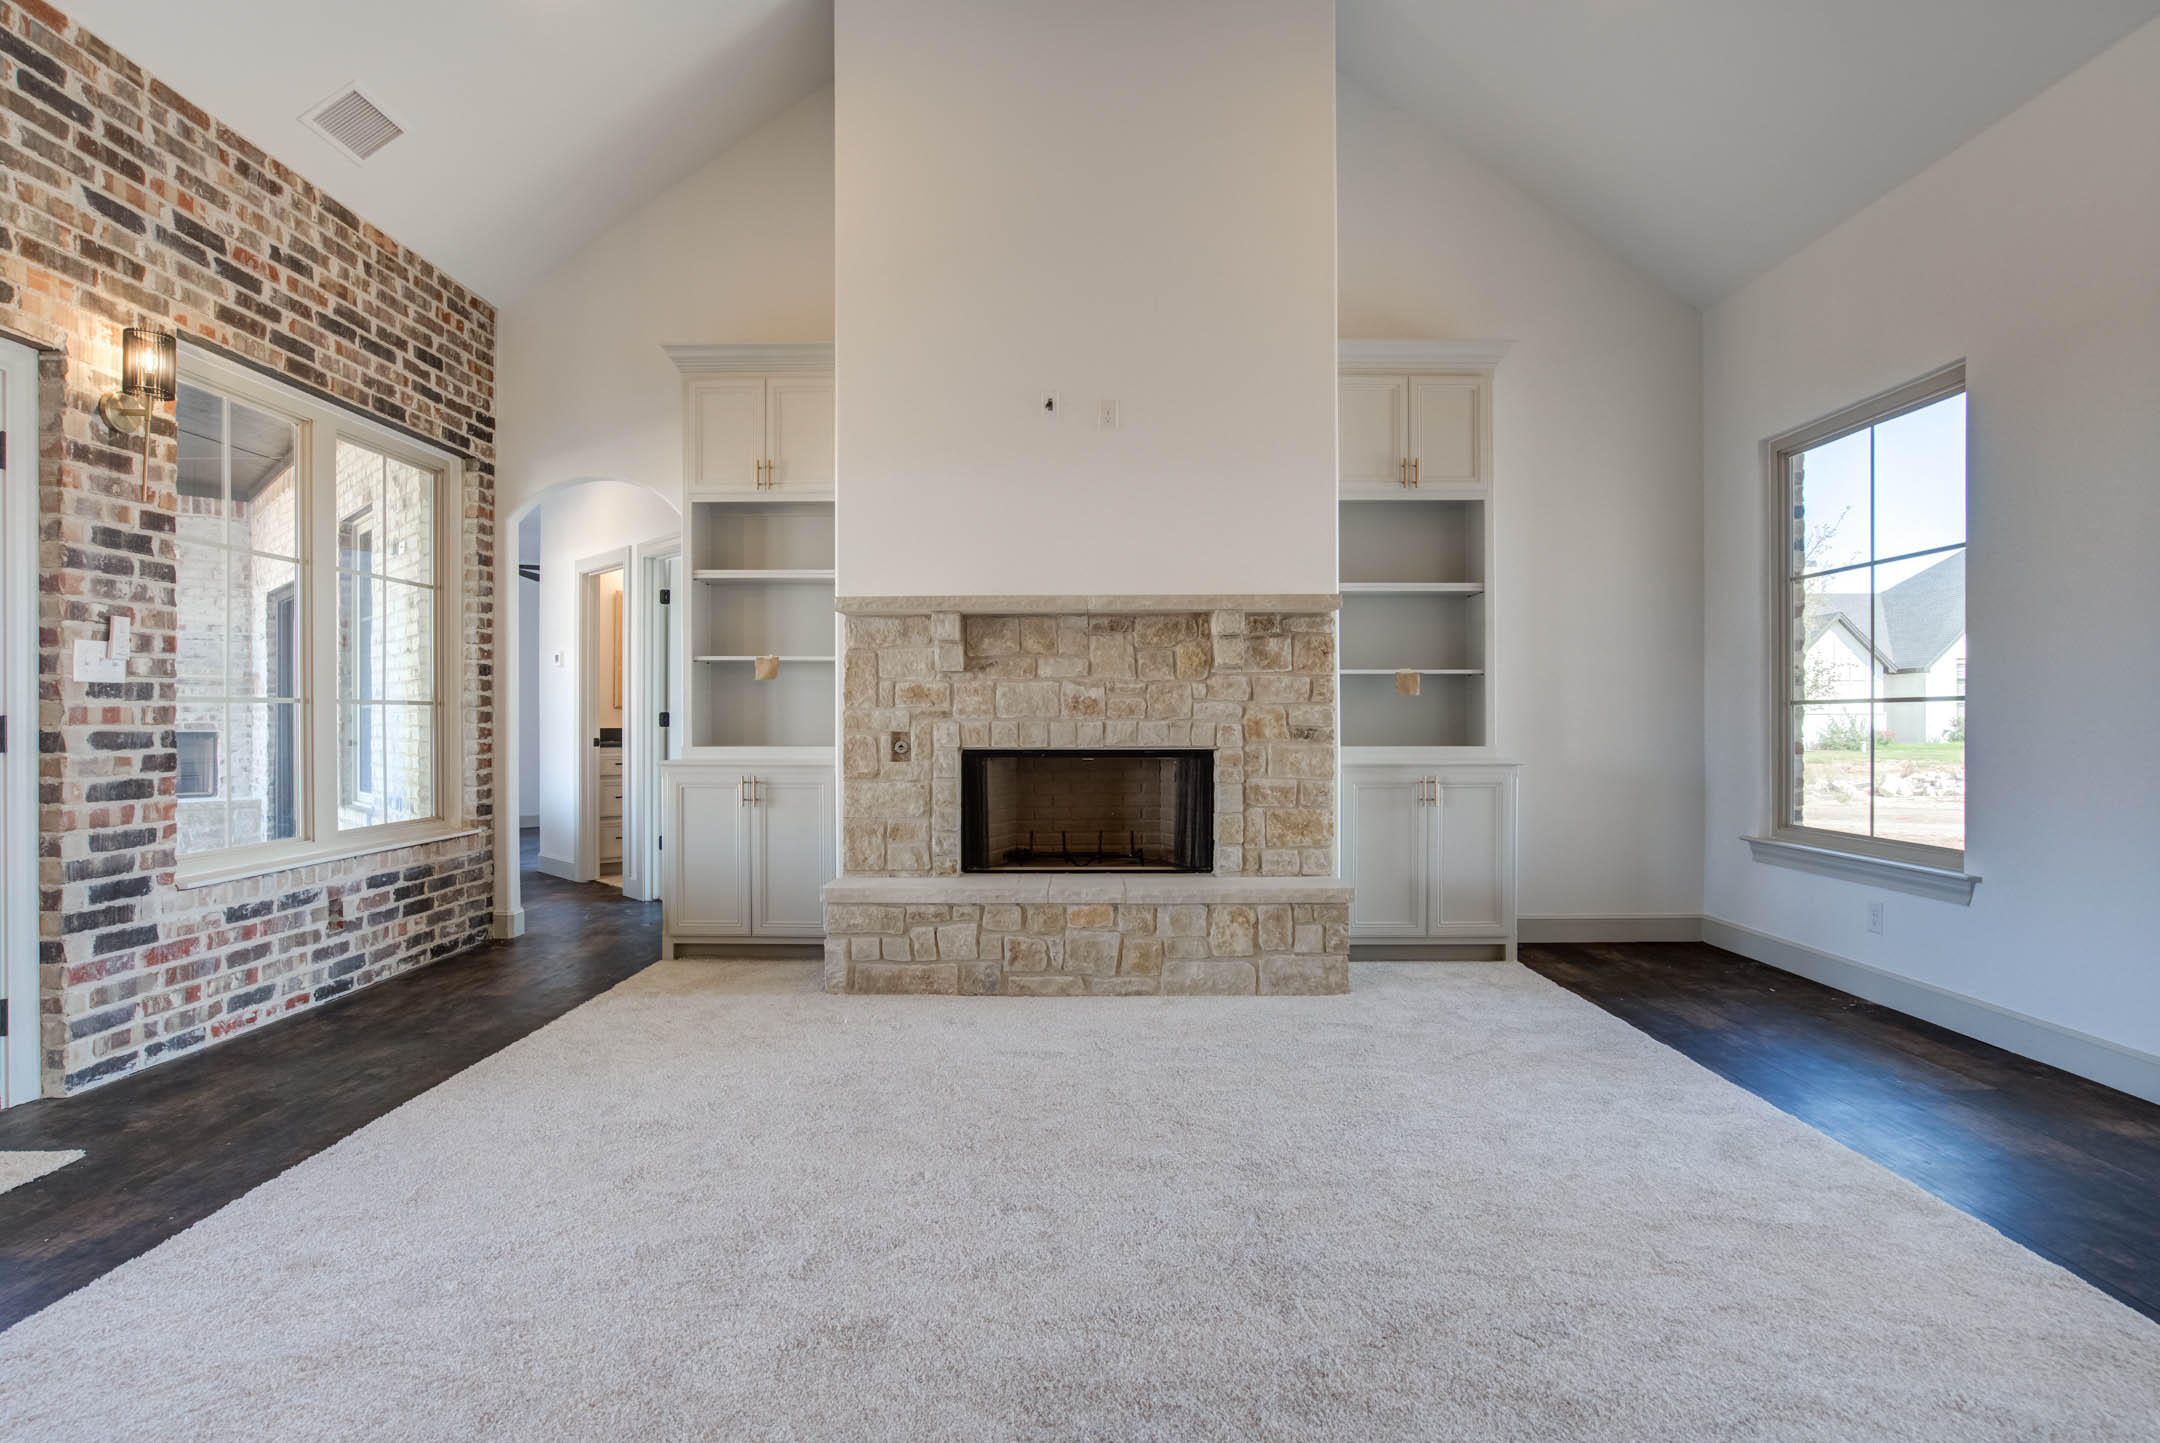 Beautiful living area in new home for sale near Lubbock, Texas.